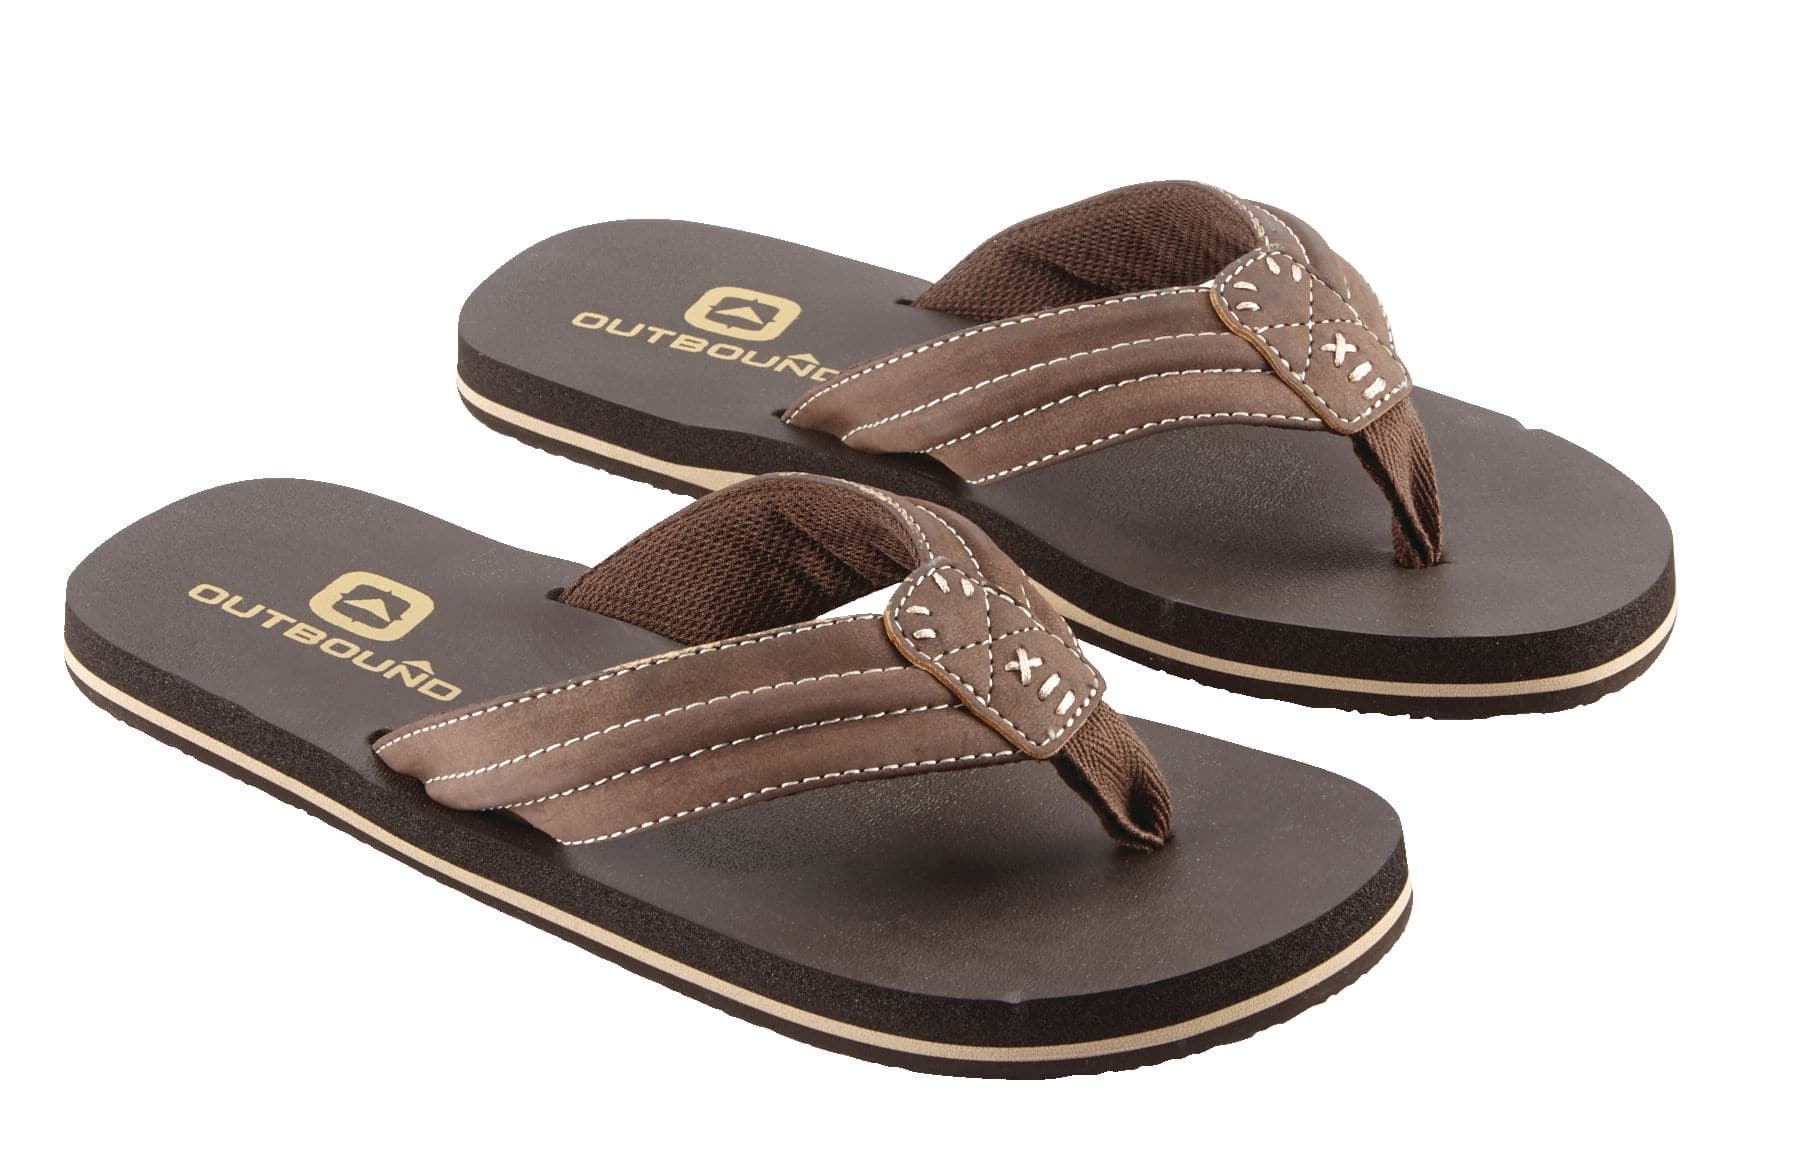 Size 8] BATA Men's Pathani Sd Outdoor Sandals at Best Price